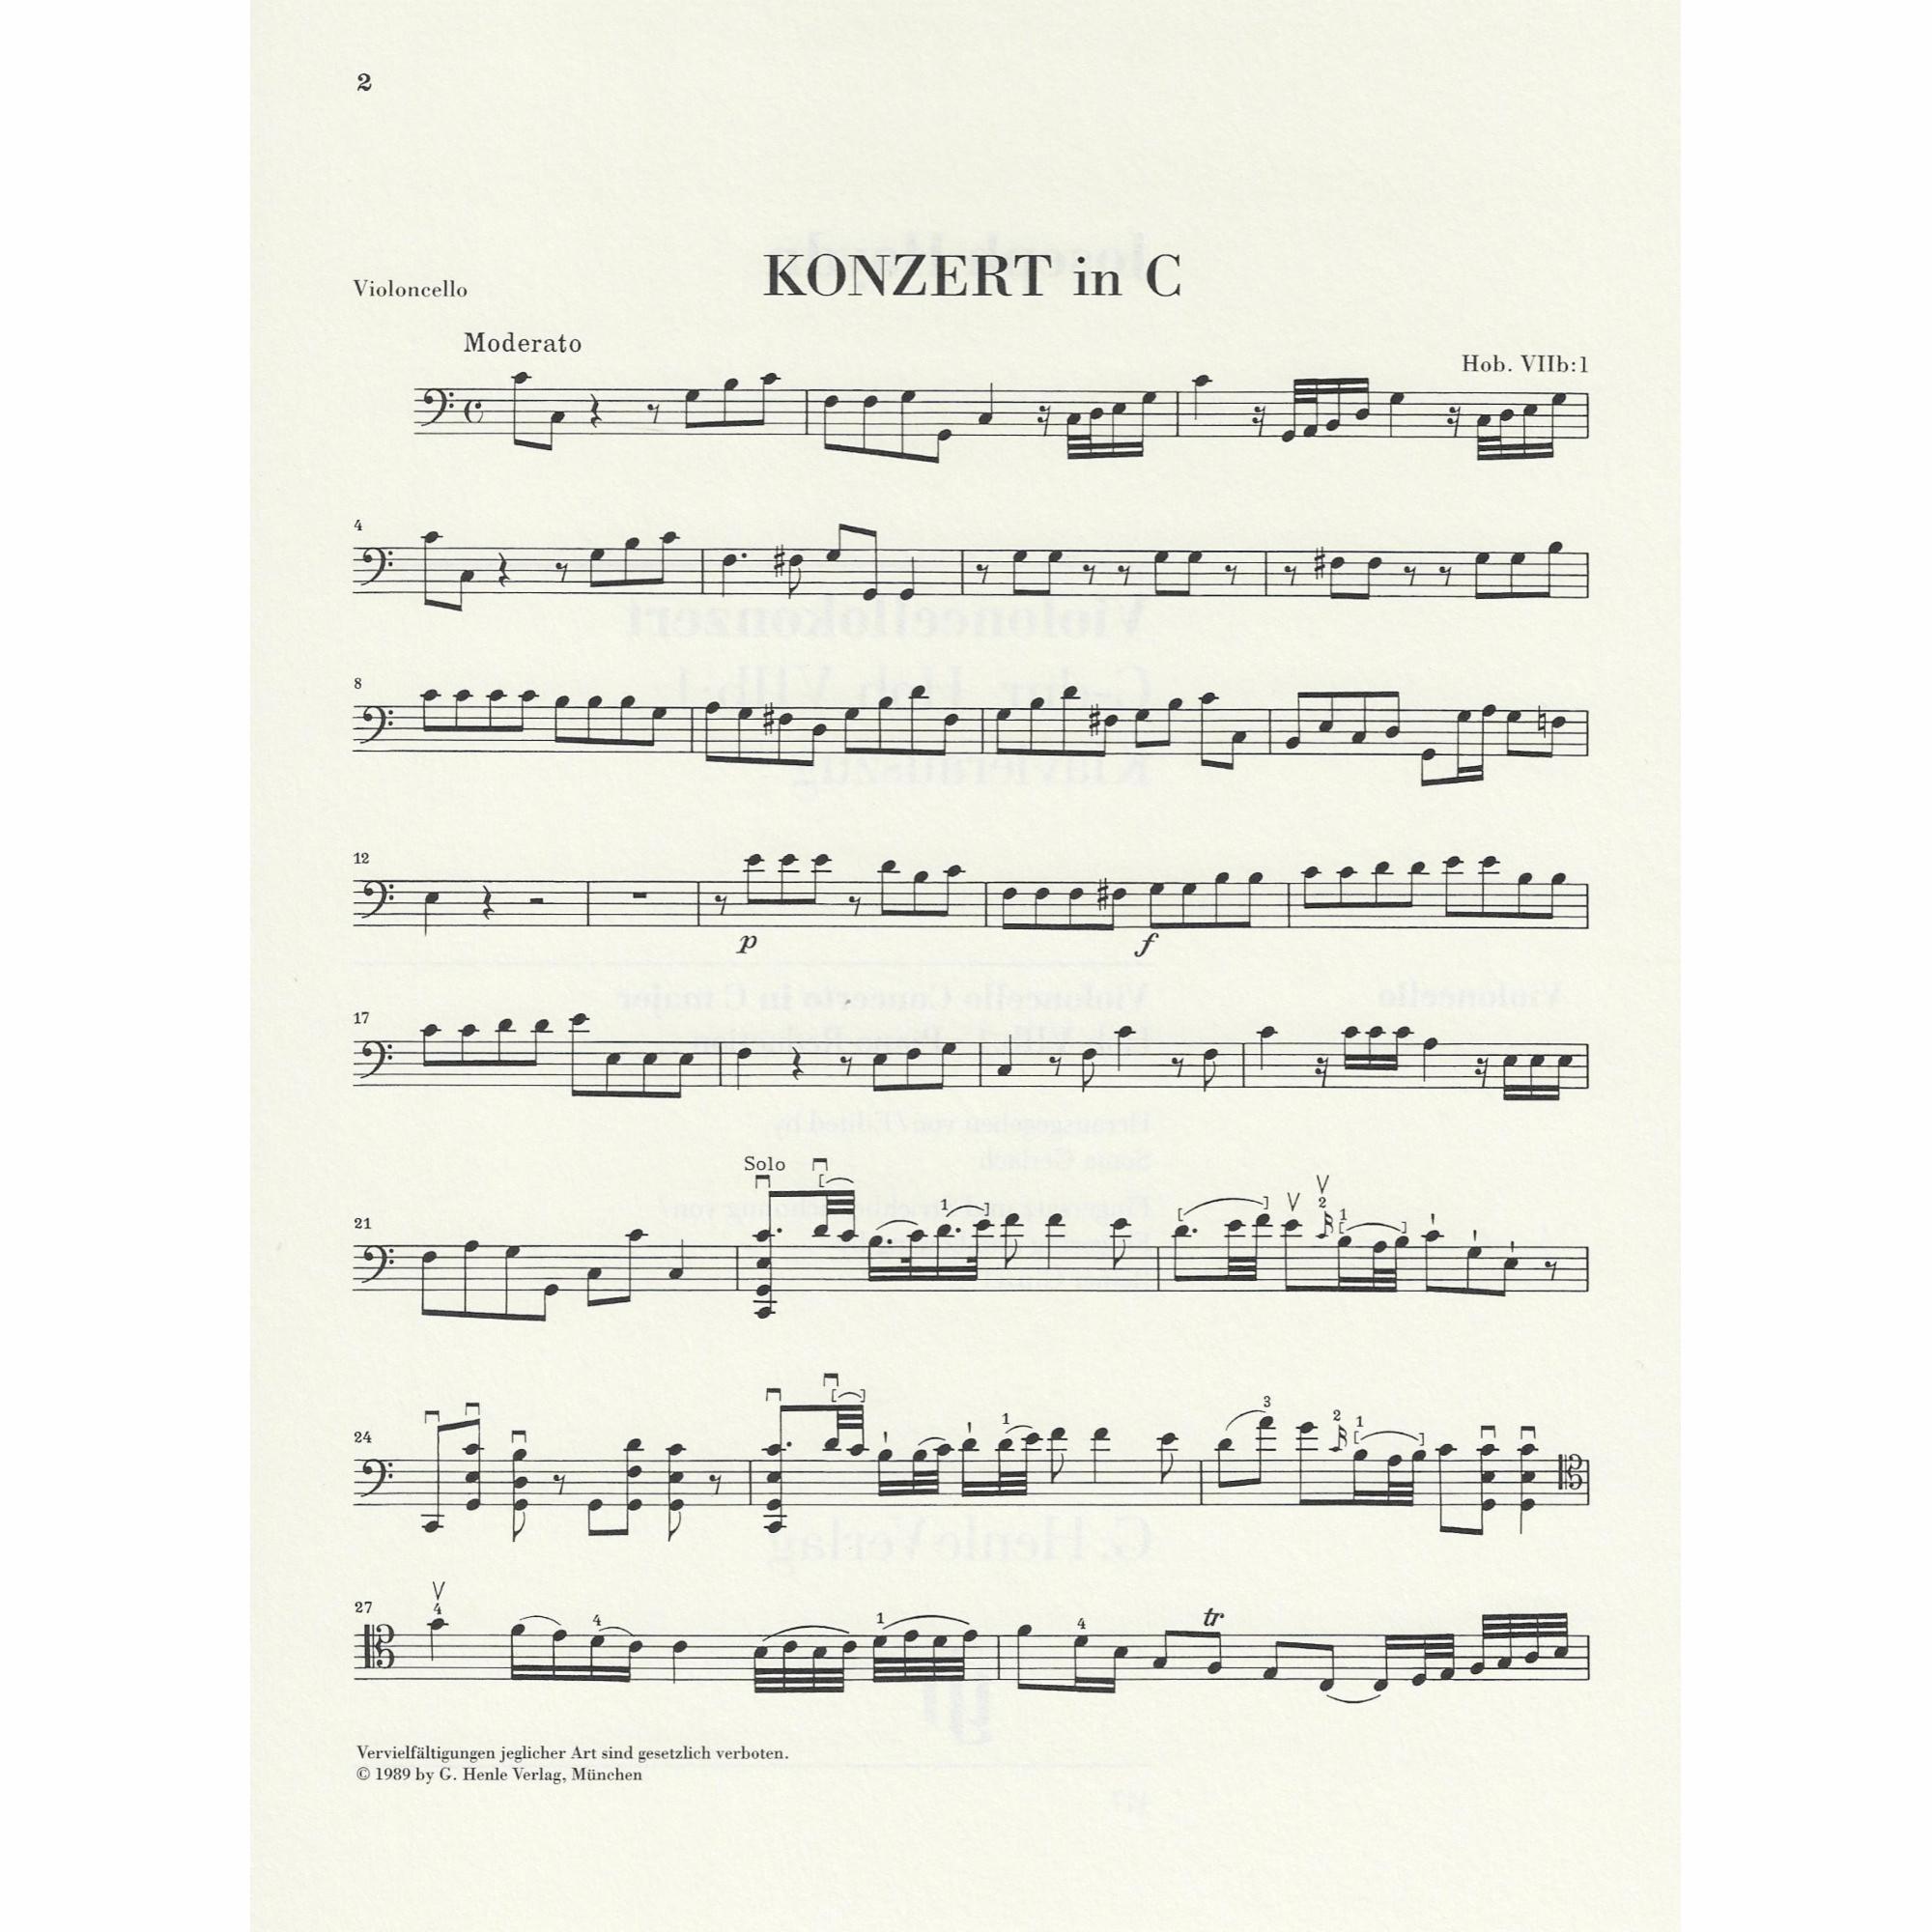 Sample: Marked Cello Part (Pg. 1)